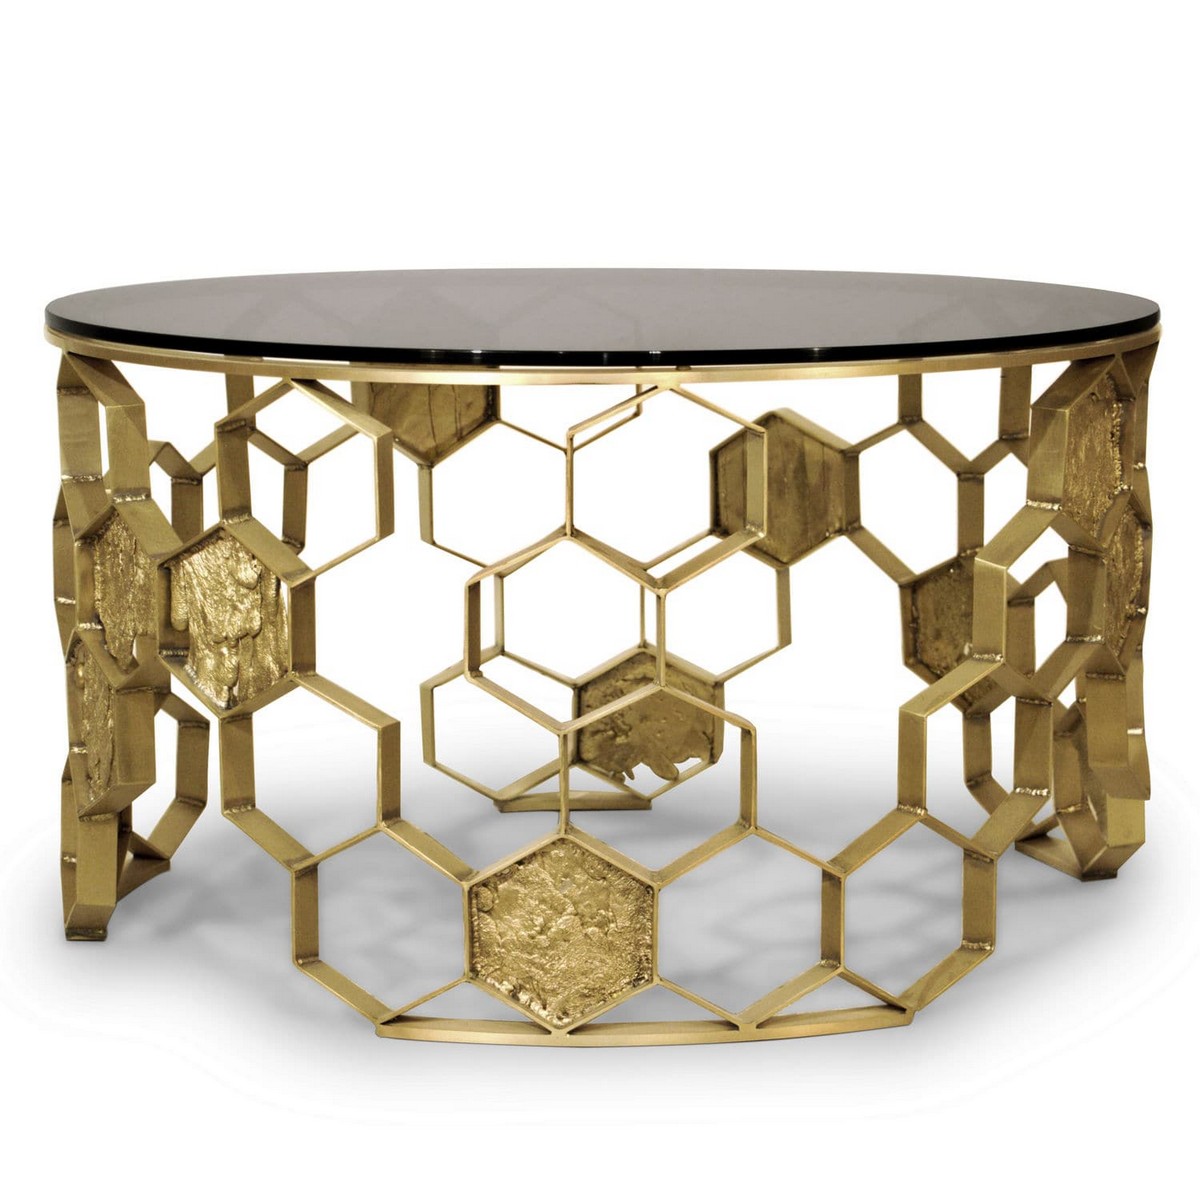 Manuka Center Table: A Luxurious Center Table For Your Living Room